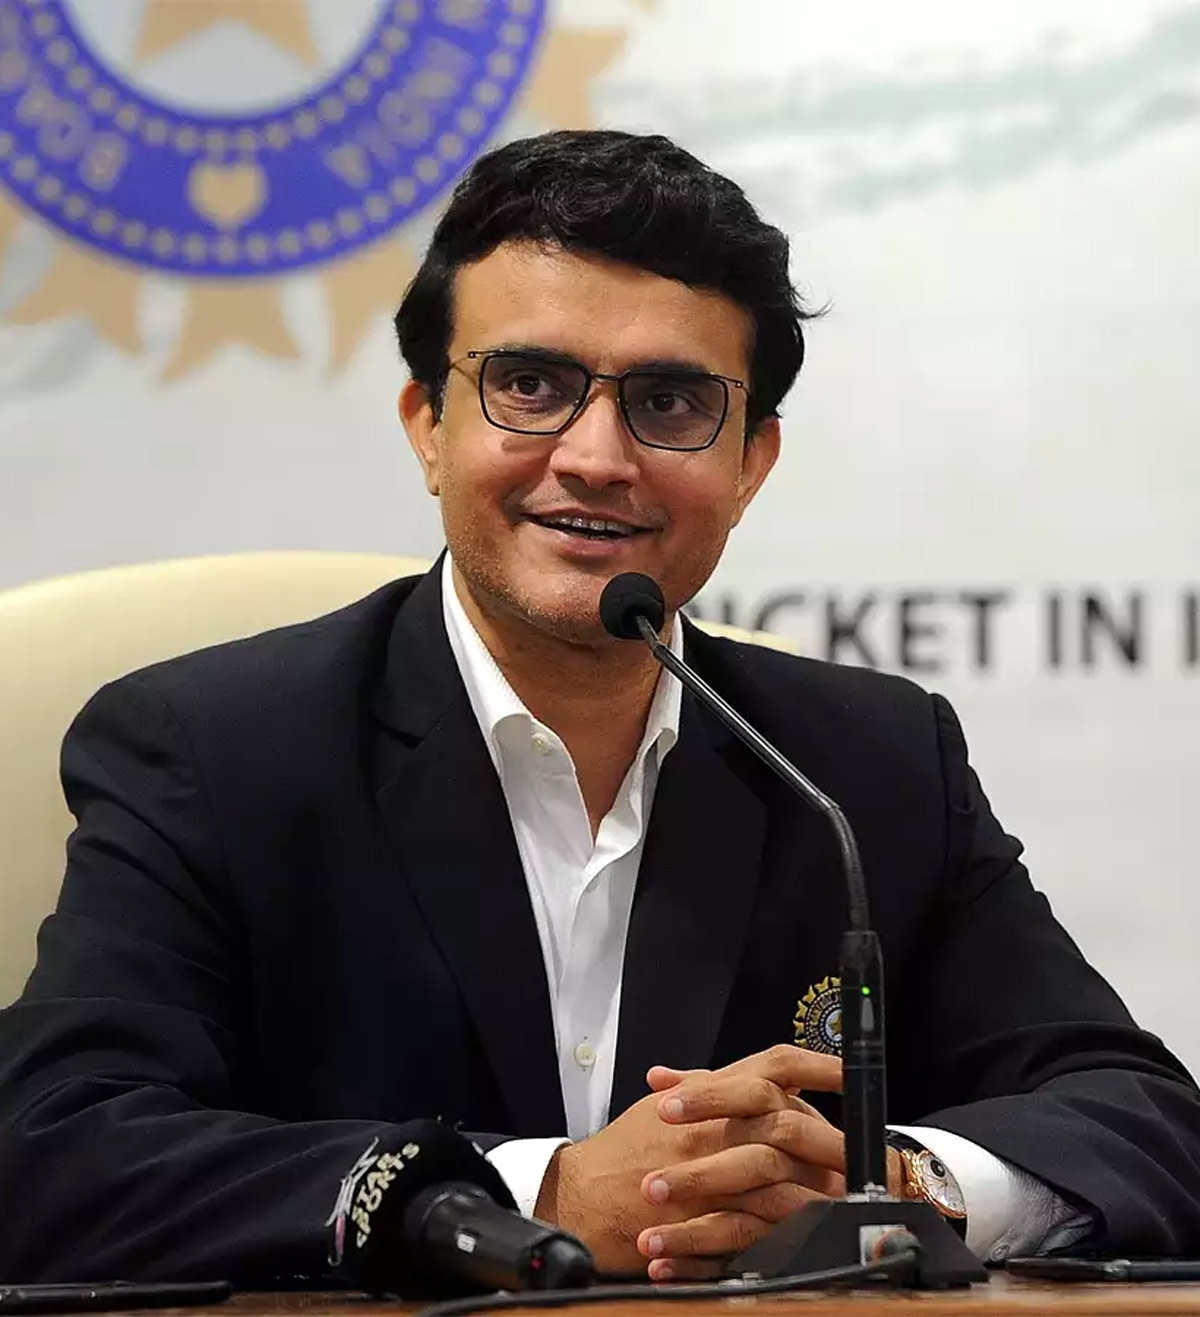 Biopic to be made on Sourav Ganguly - Deets inside